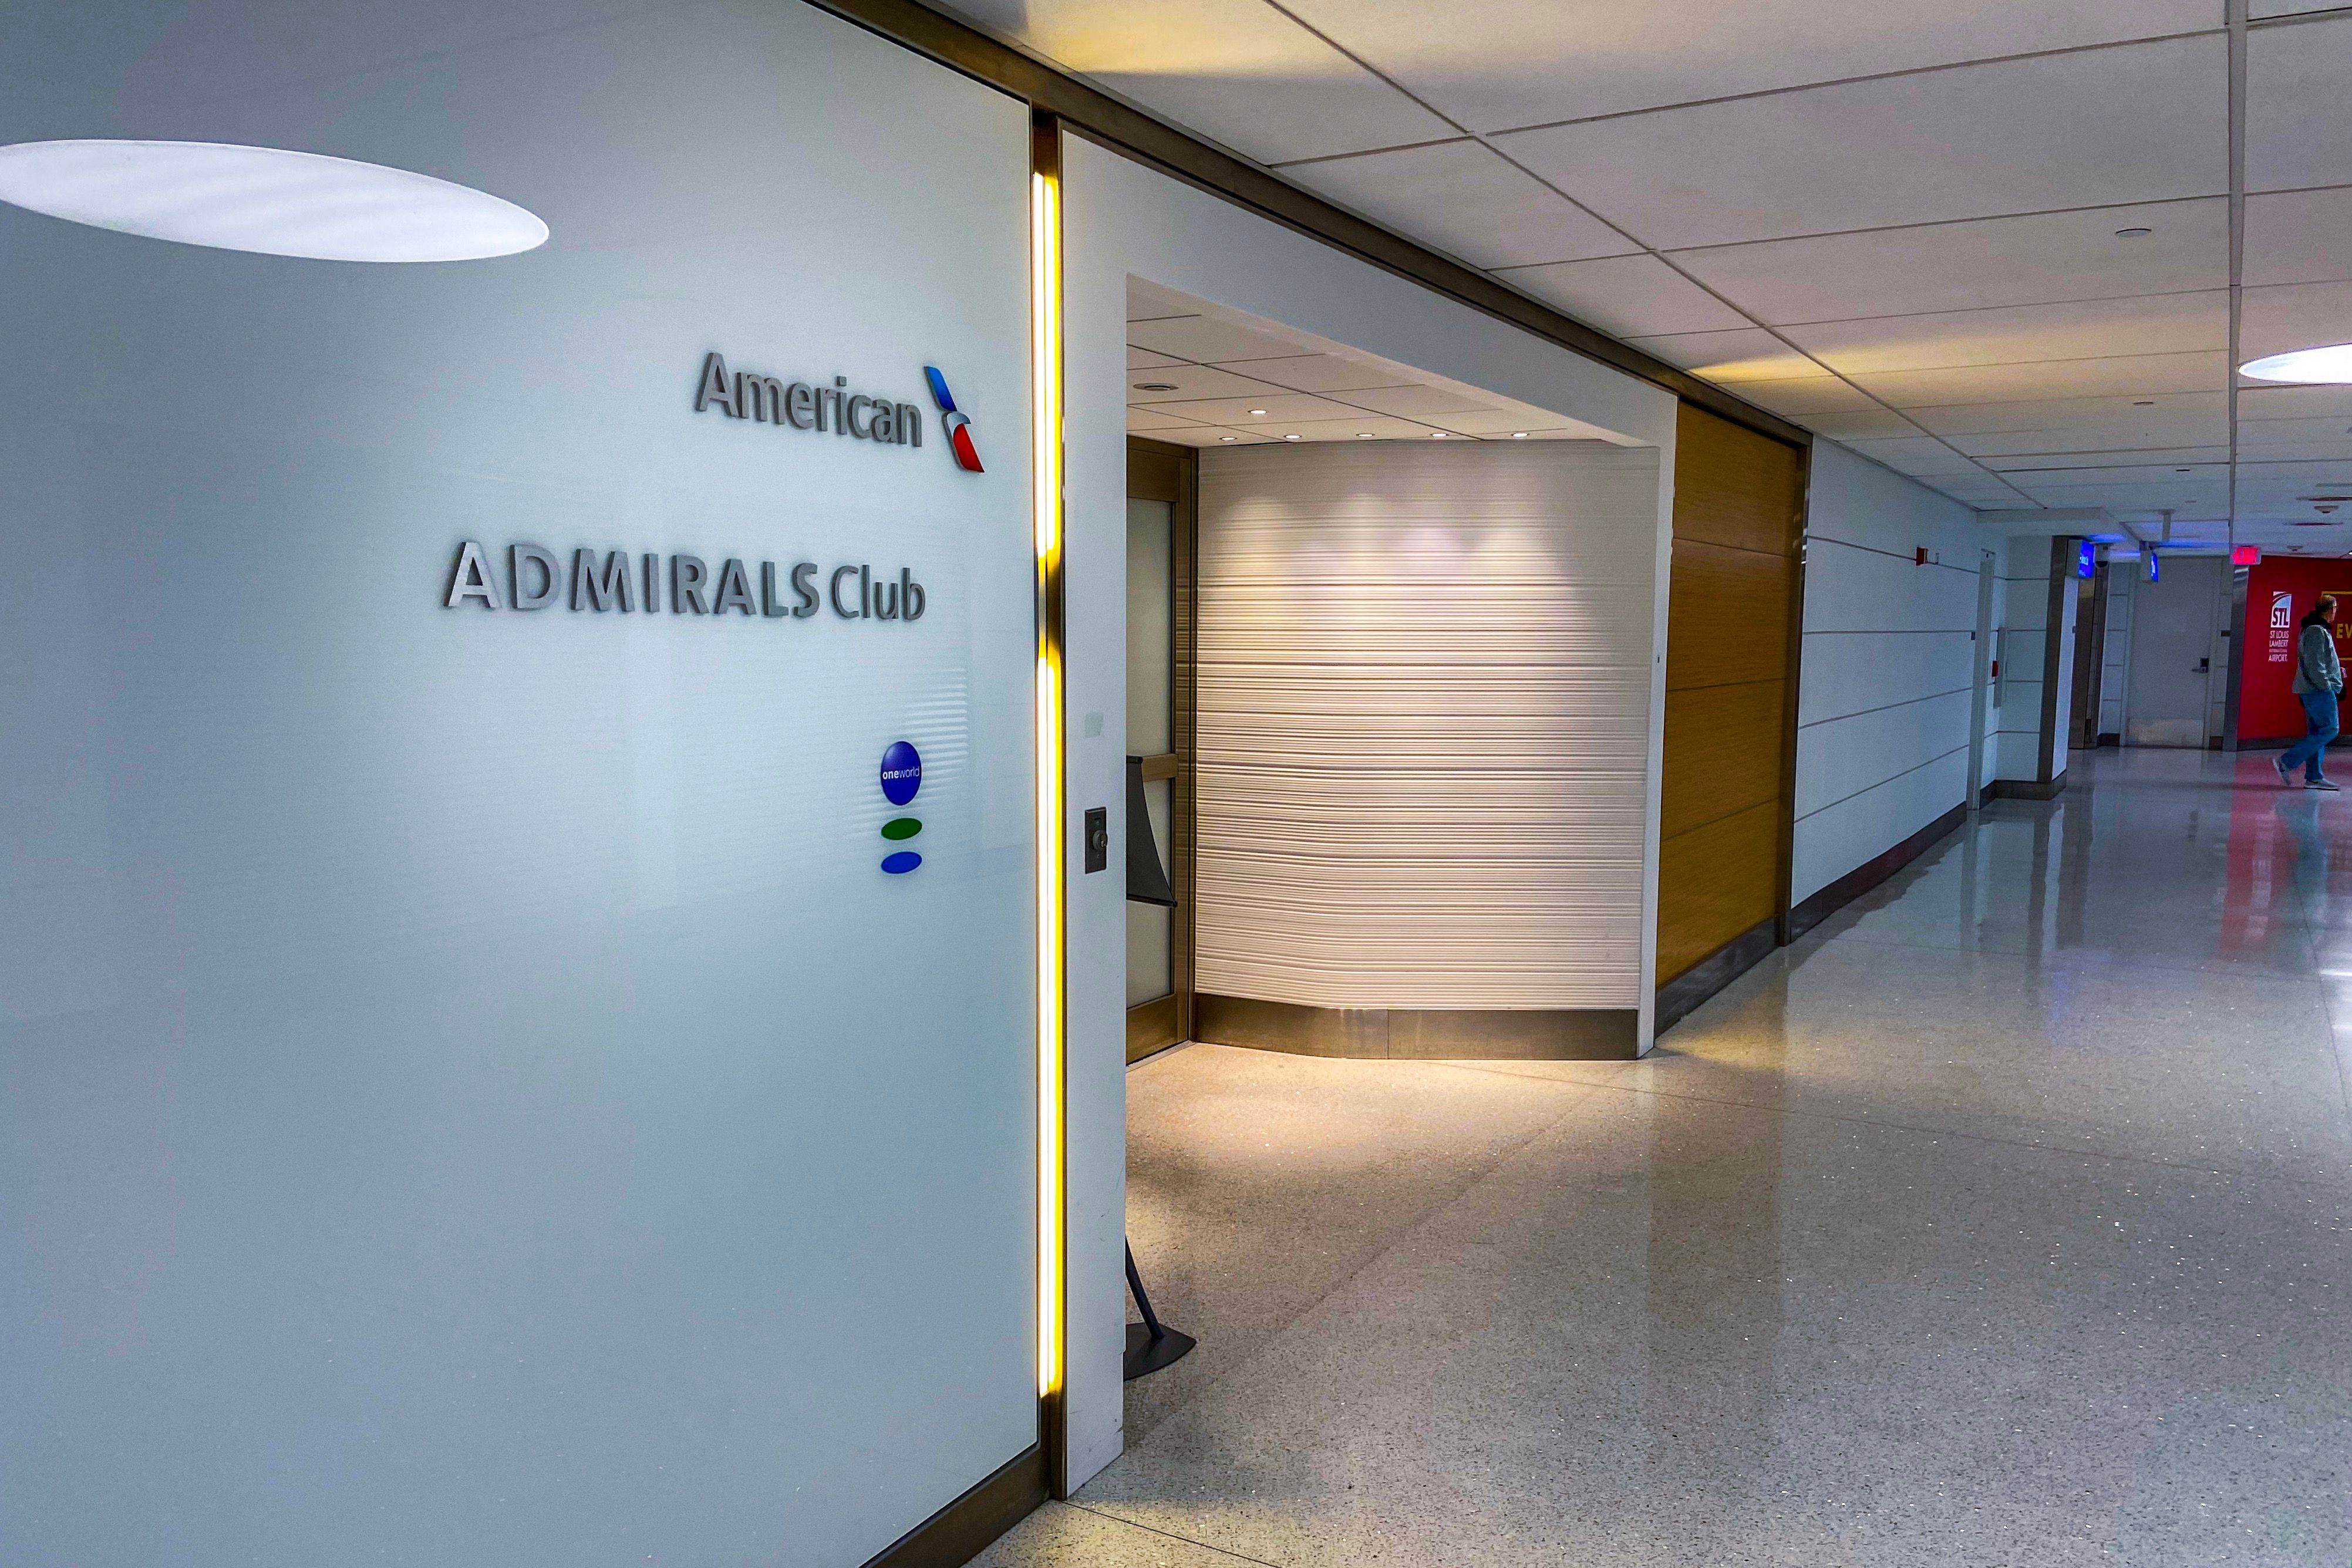 American Airlines Admirals Club lounge at St. Louis International Airport.